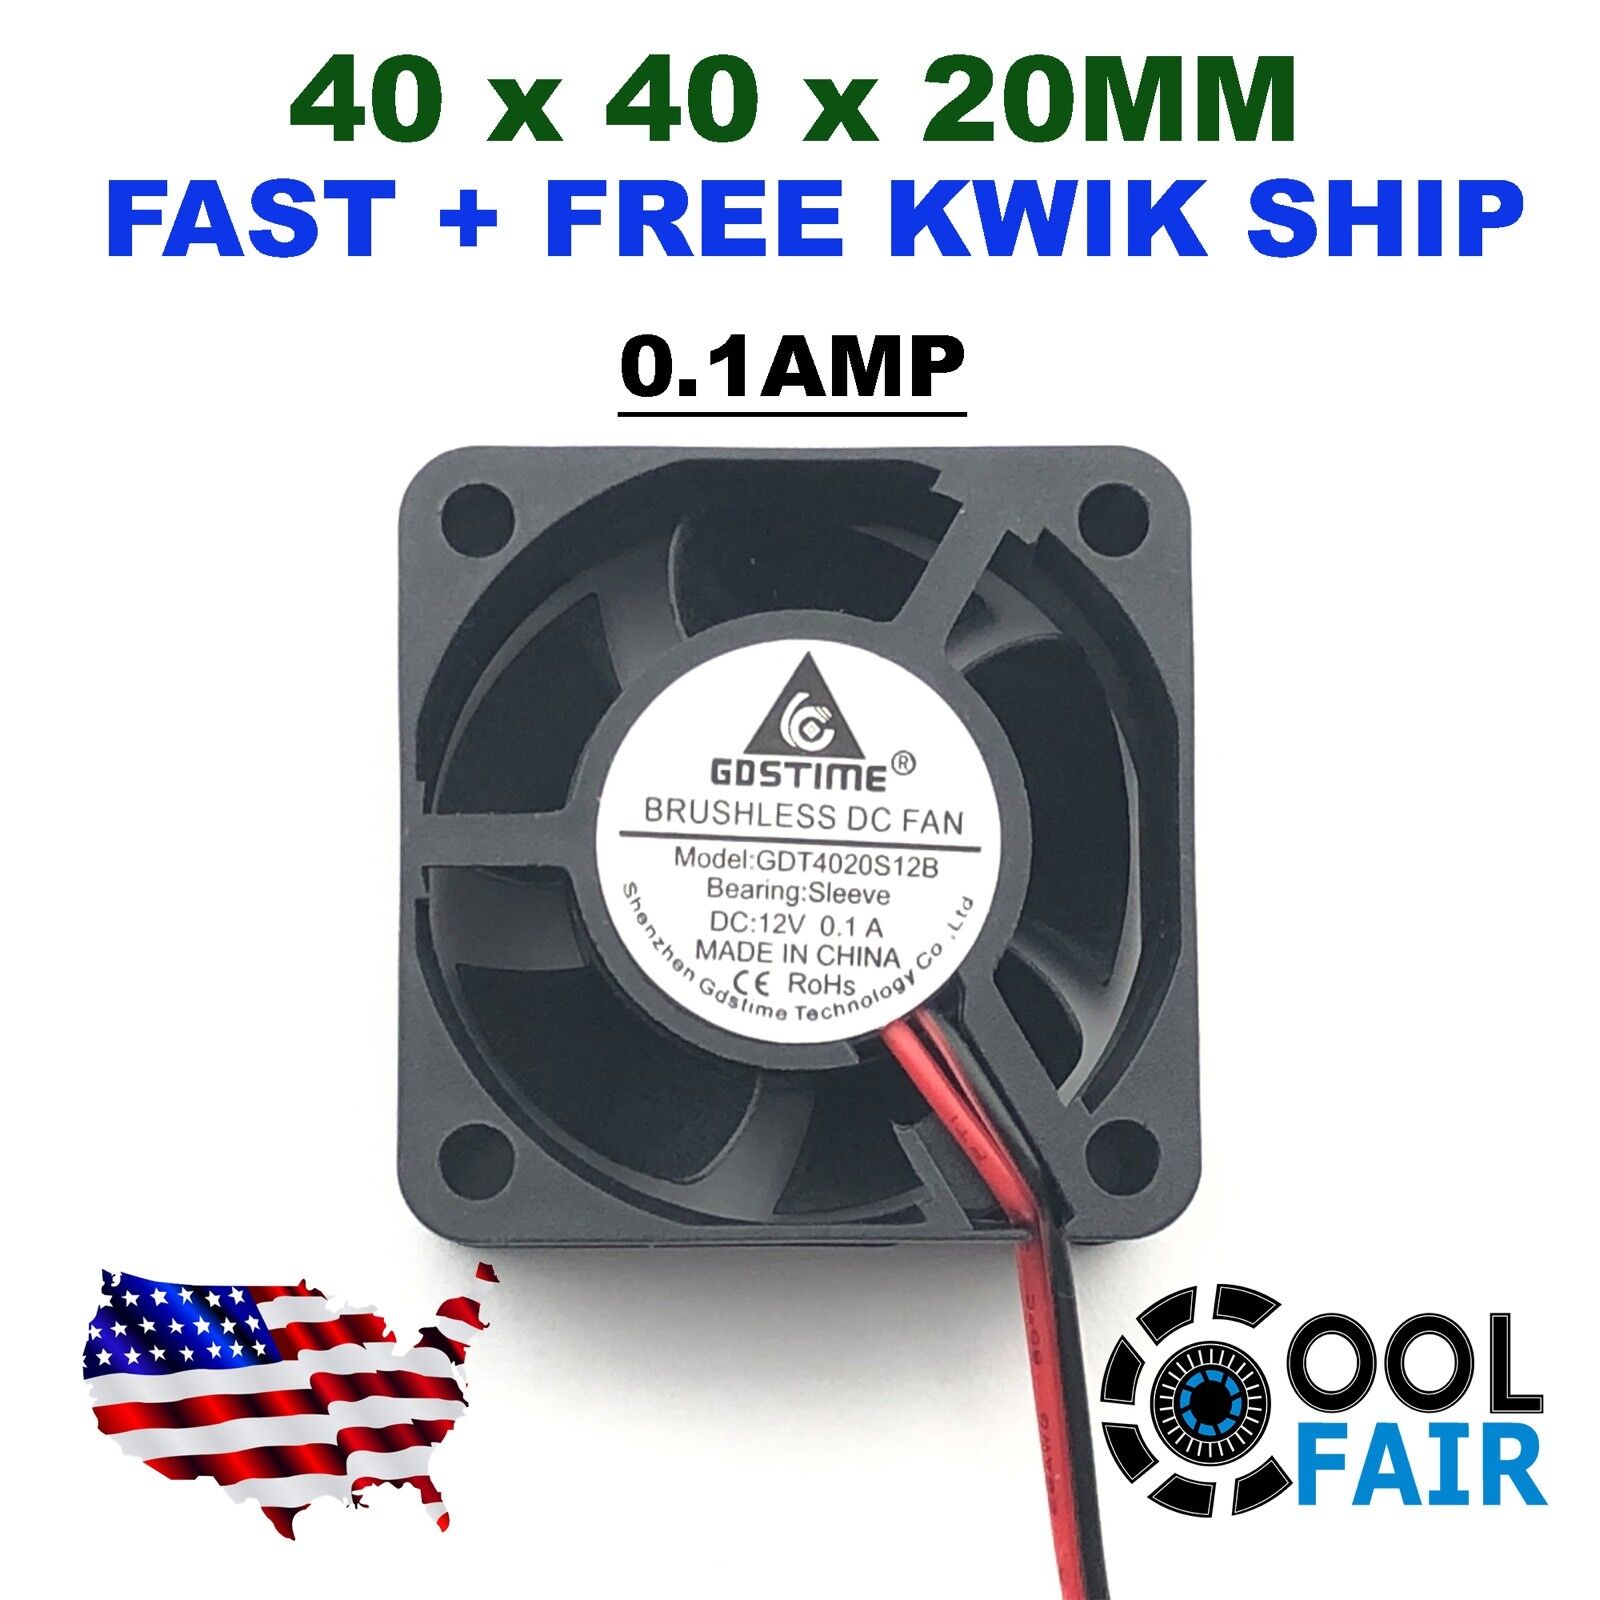 12v 40mm Brushless DC Cooling Fan 40x40x20mm 4020 5 blades 2pin US Quick Ship